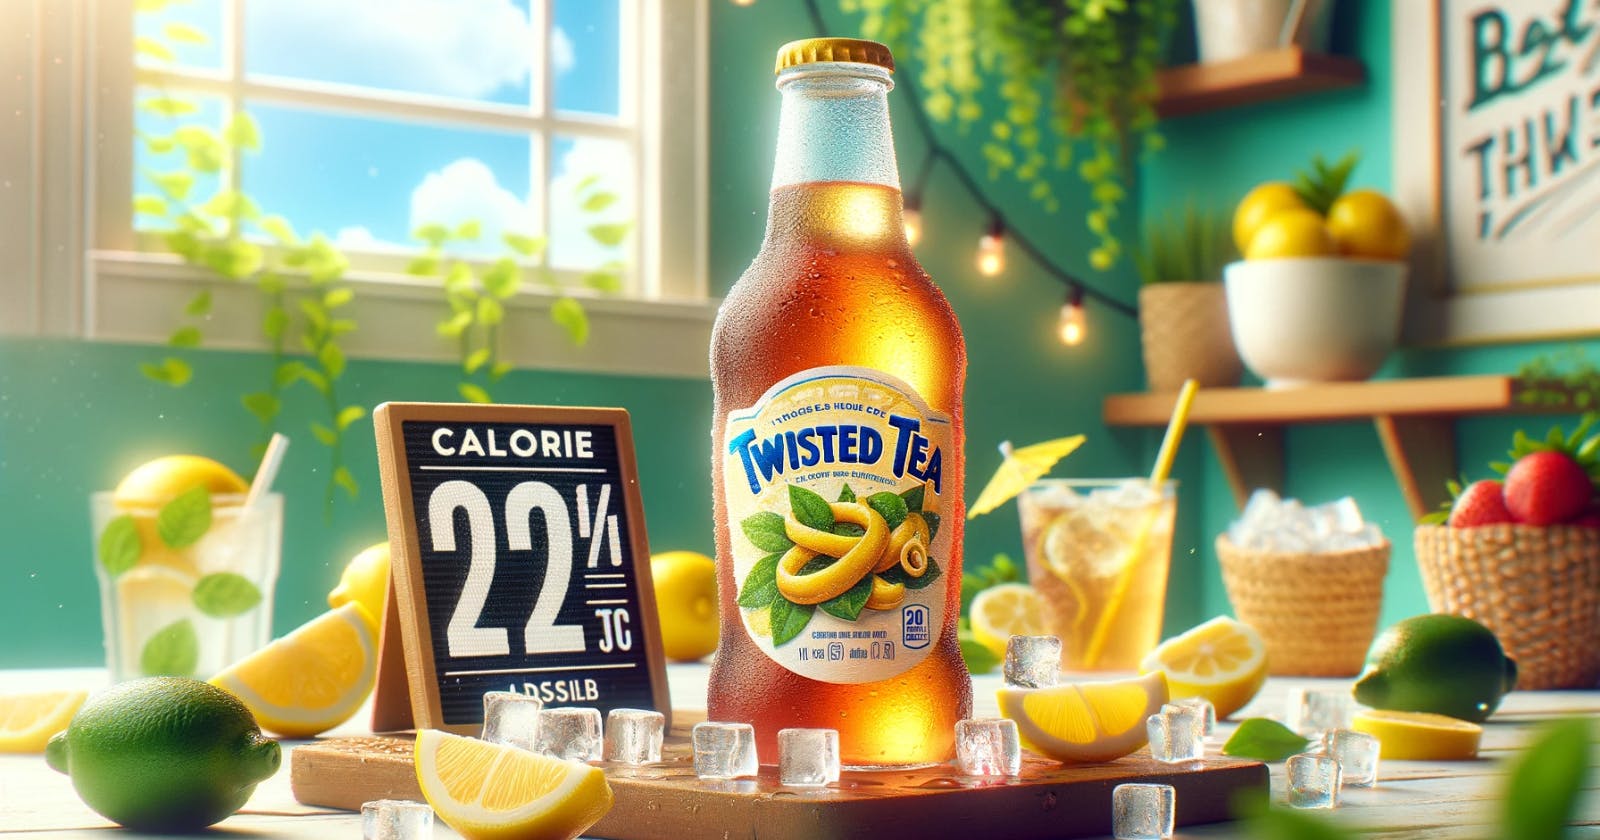 How many calories are in a Twisted Tea?